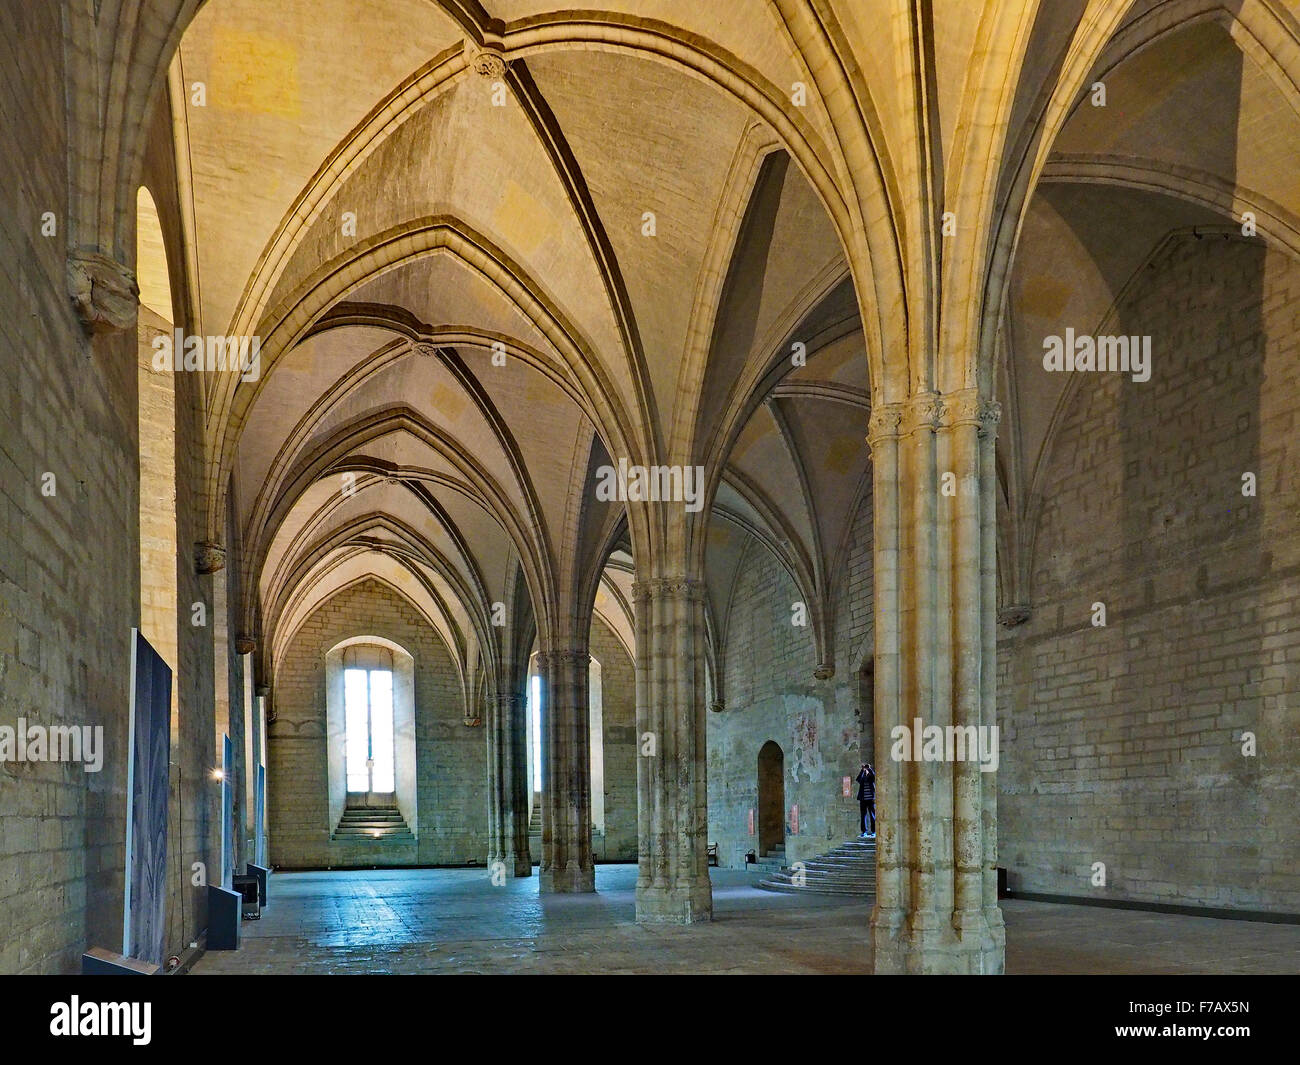 Interior views of the Papal Palace in Avignon southern France Stock Photo